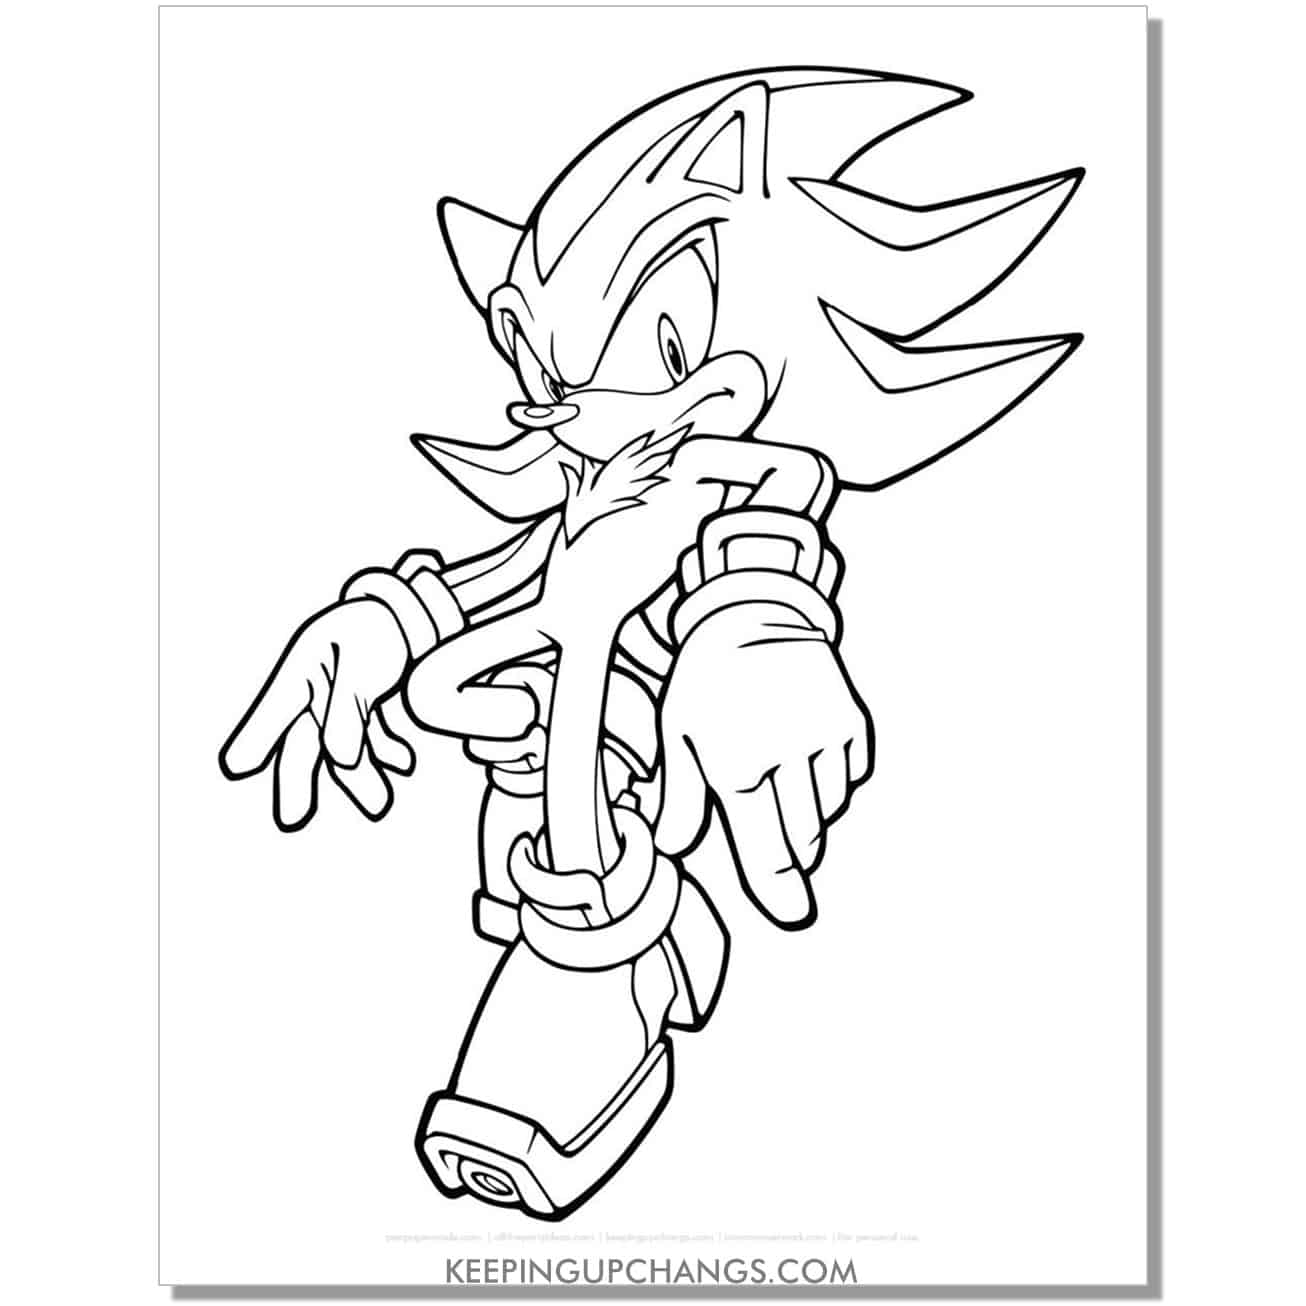 shadow sonic walking with upper body leaning back coloring page.